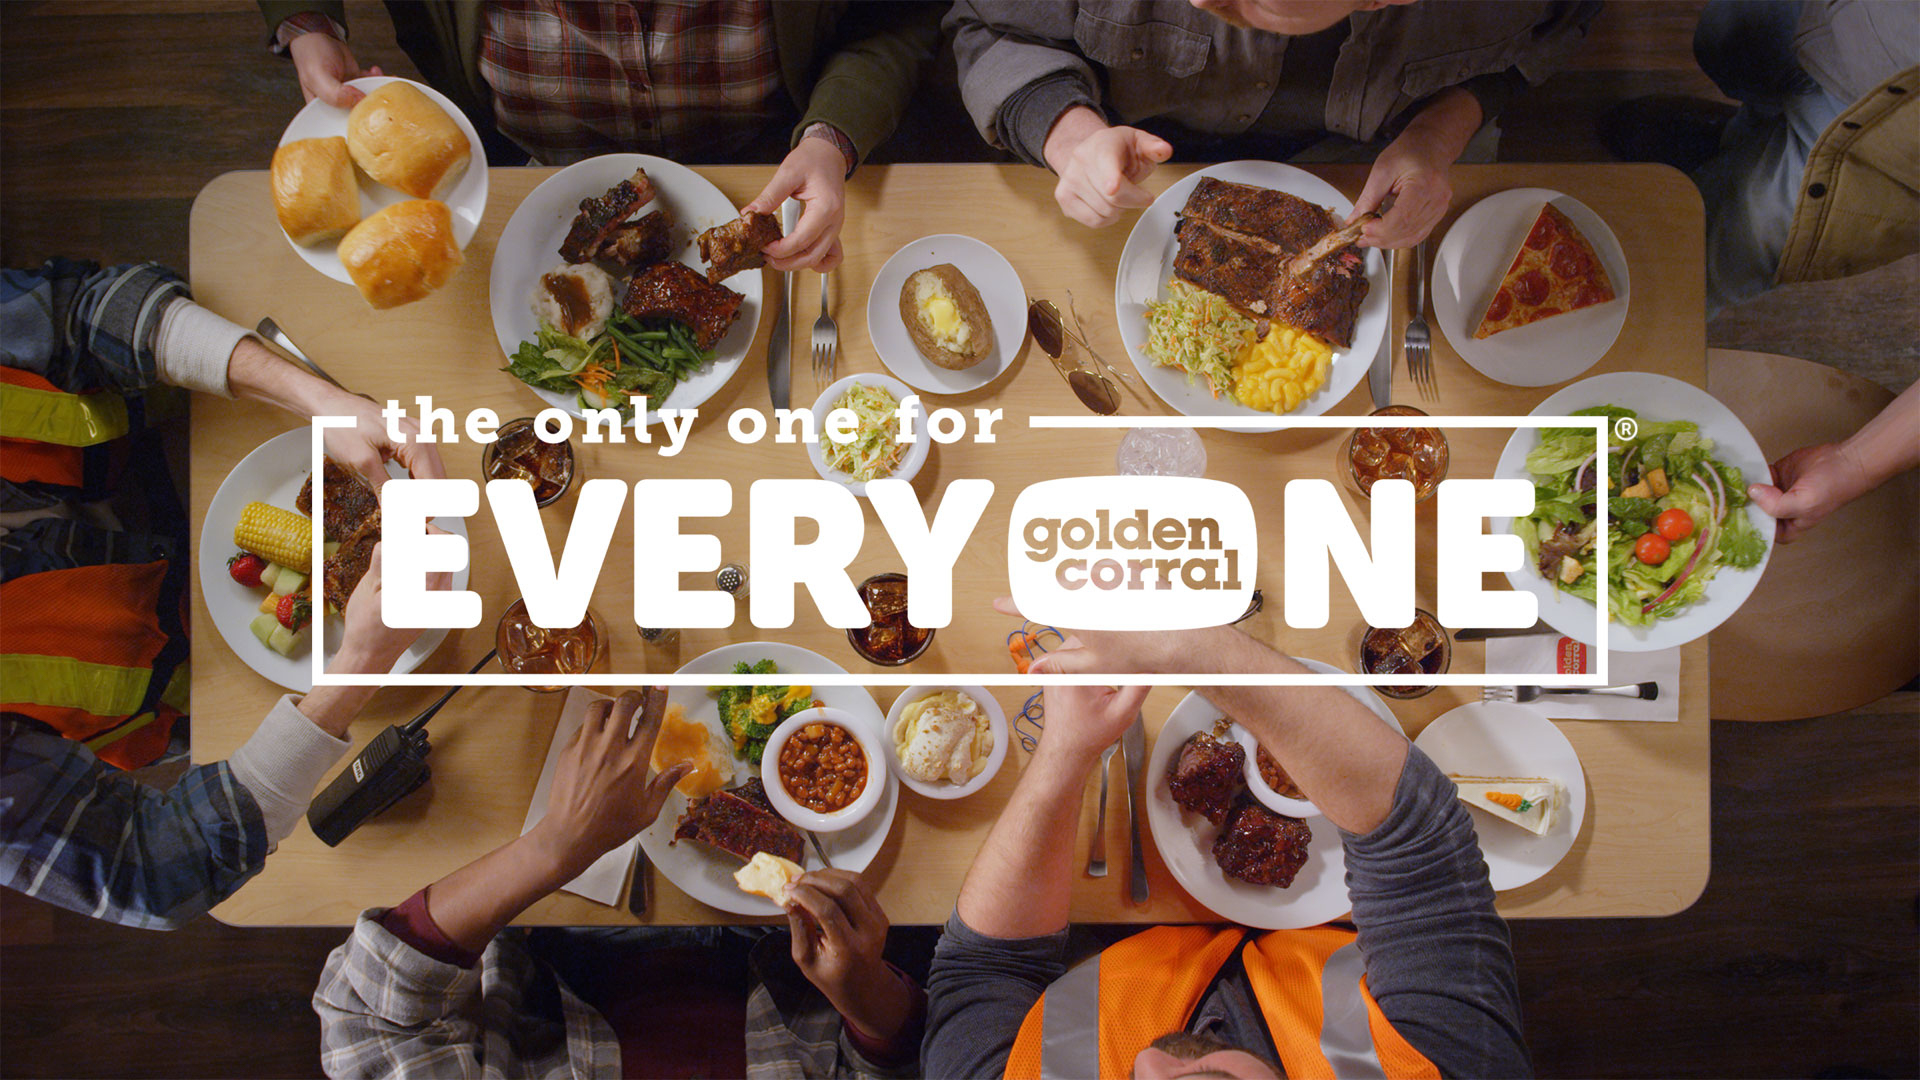 Golden Corral Buffet Restaurants - The Only One for Everyone